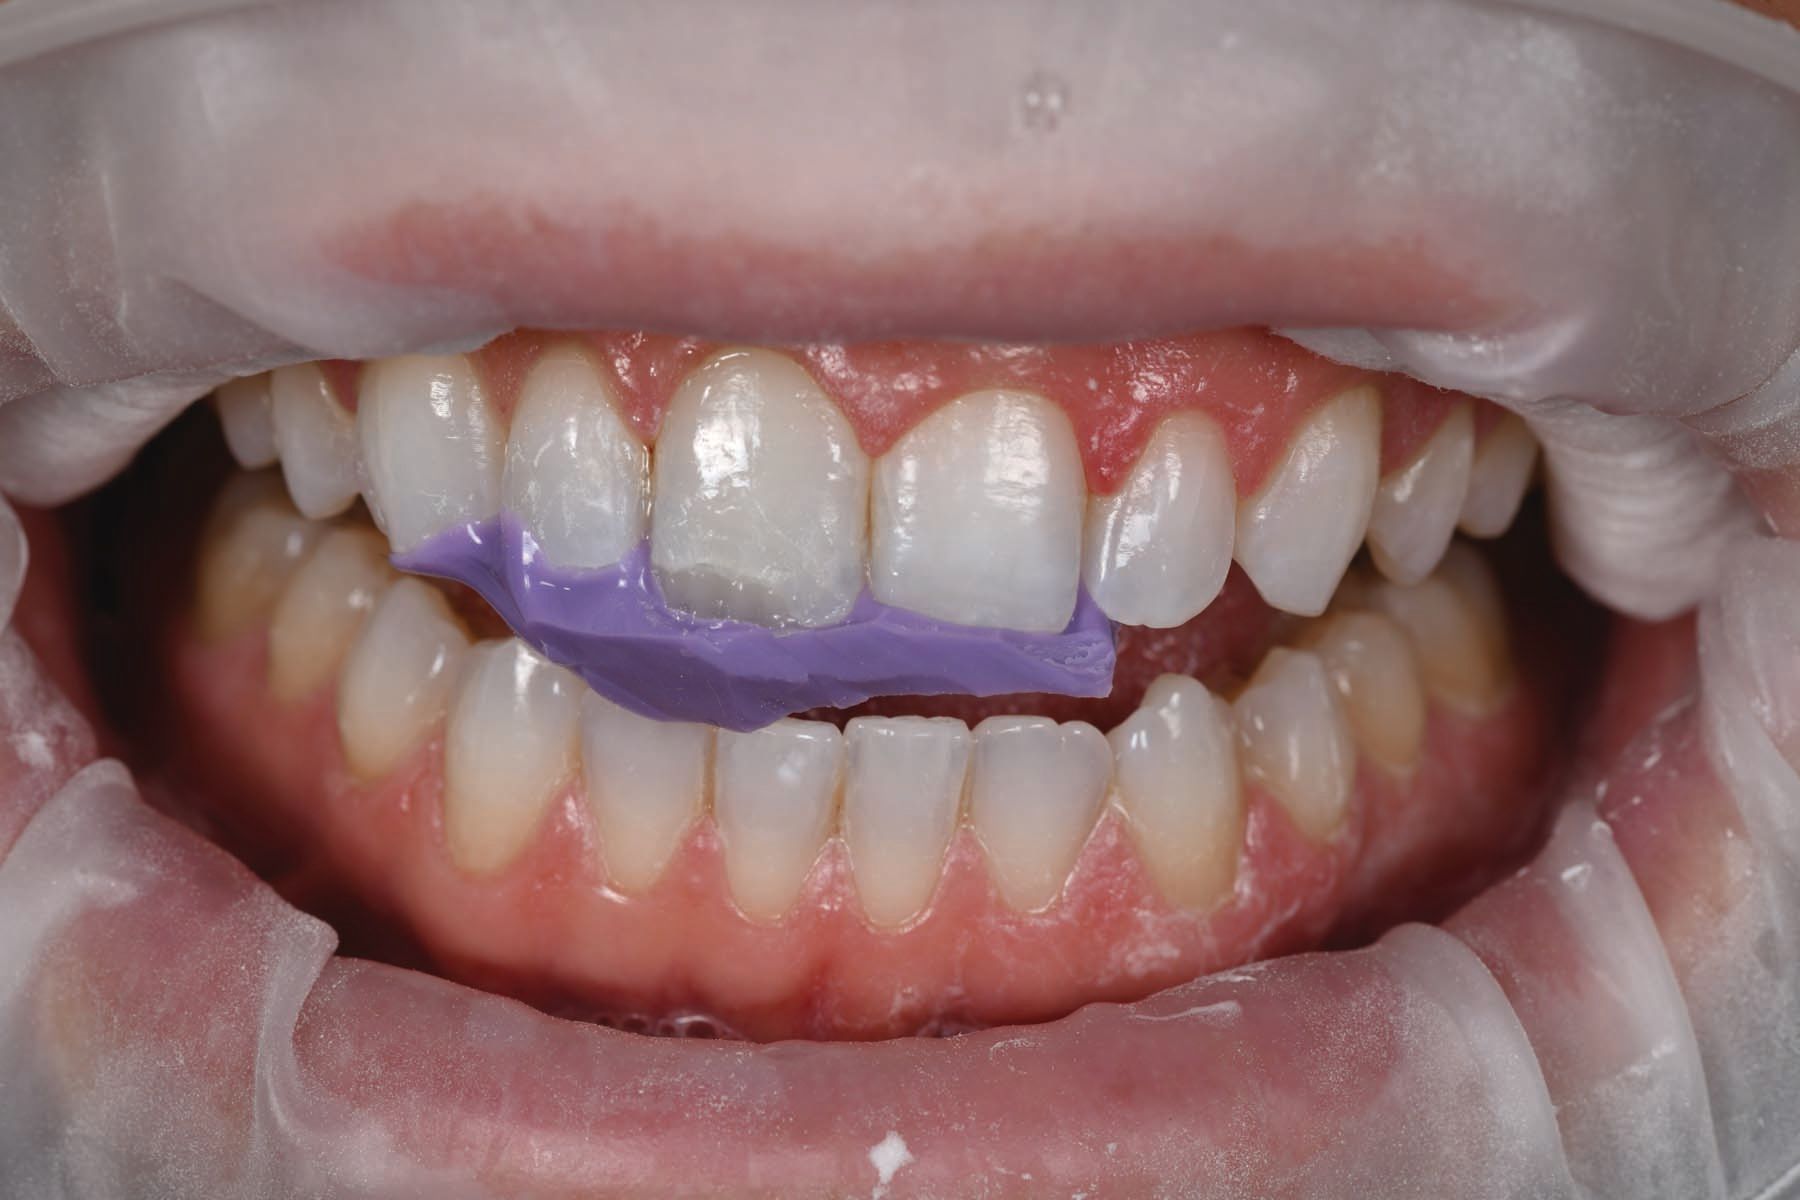 Figure 11. Subtle undulations along the incisal edge were created with a composite tool.